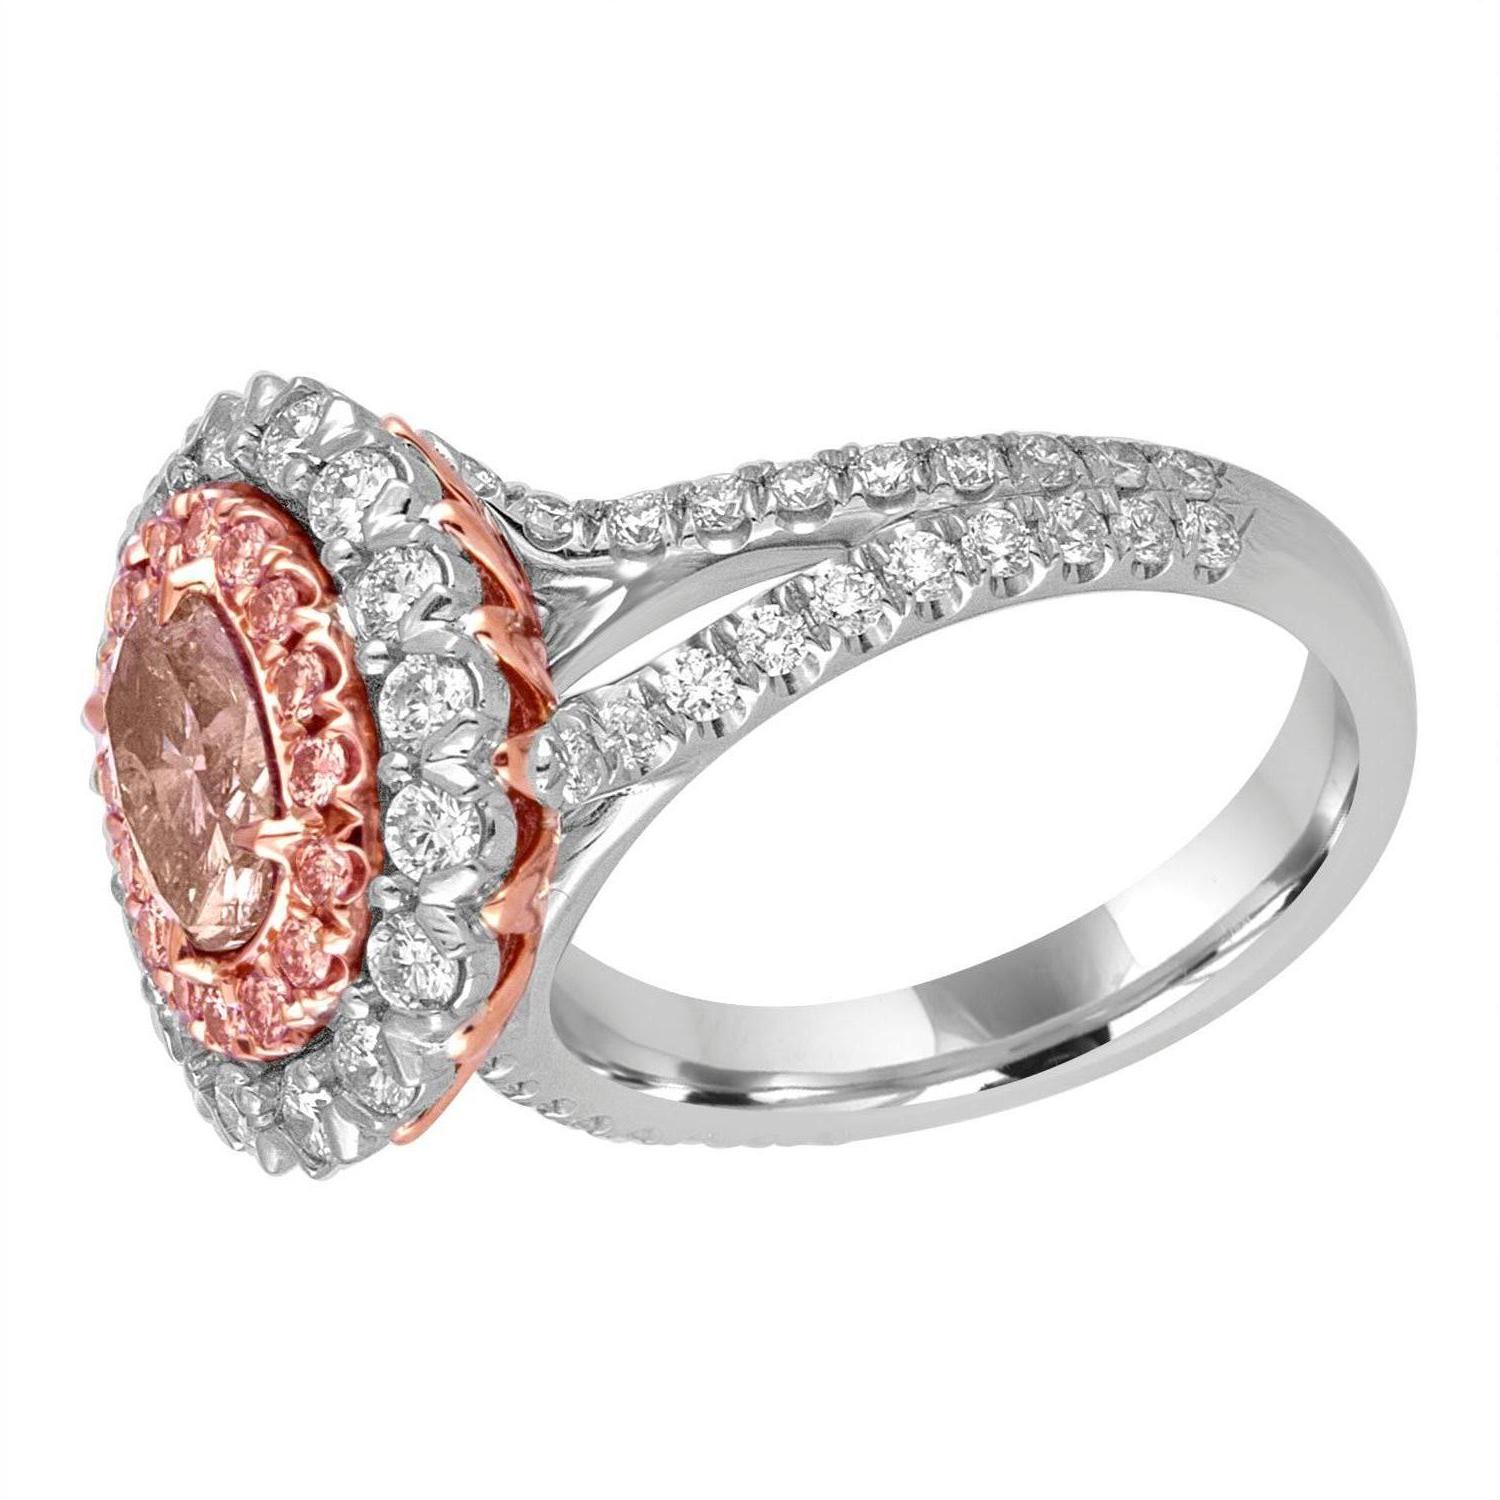 1.10 Carat GIA Certified Fancy Brownish Pink and White Diamond Platinum Ring For Sale 2